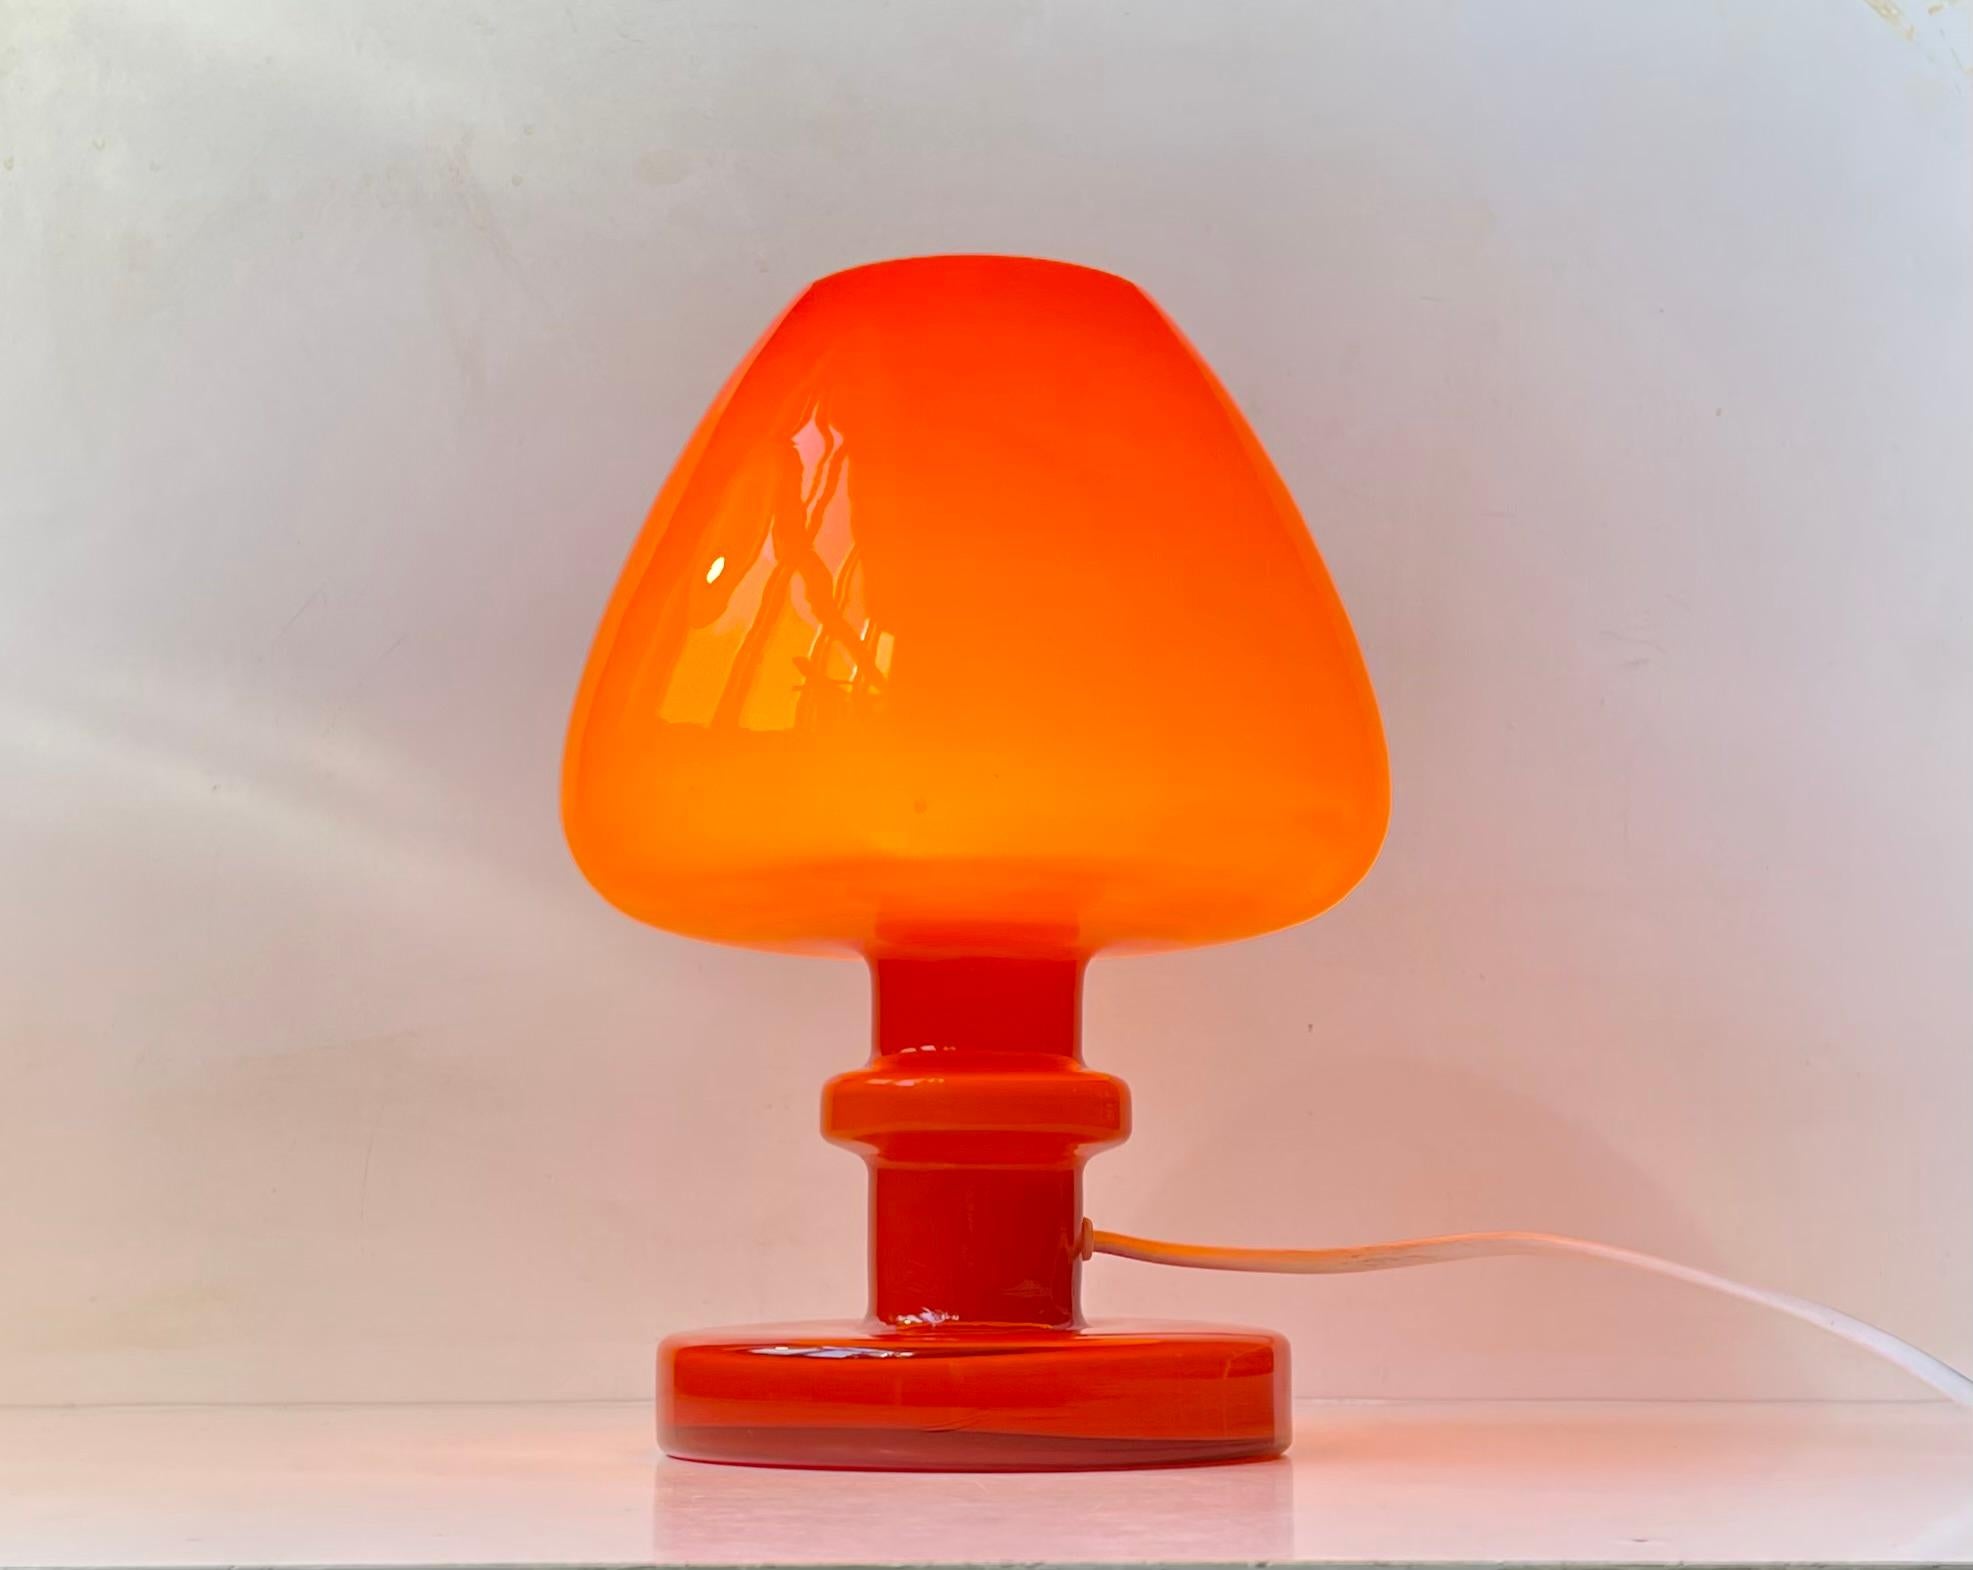 B 172 a rare desk or table lamp in cased orange glass with white opaline interior. It was designed by Hans Agne Jakobsson during the 1960s and manufactured by his company Markaryd AB in Sweden. It features its original cord with on/of switch.